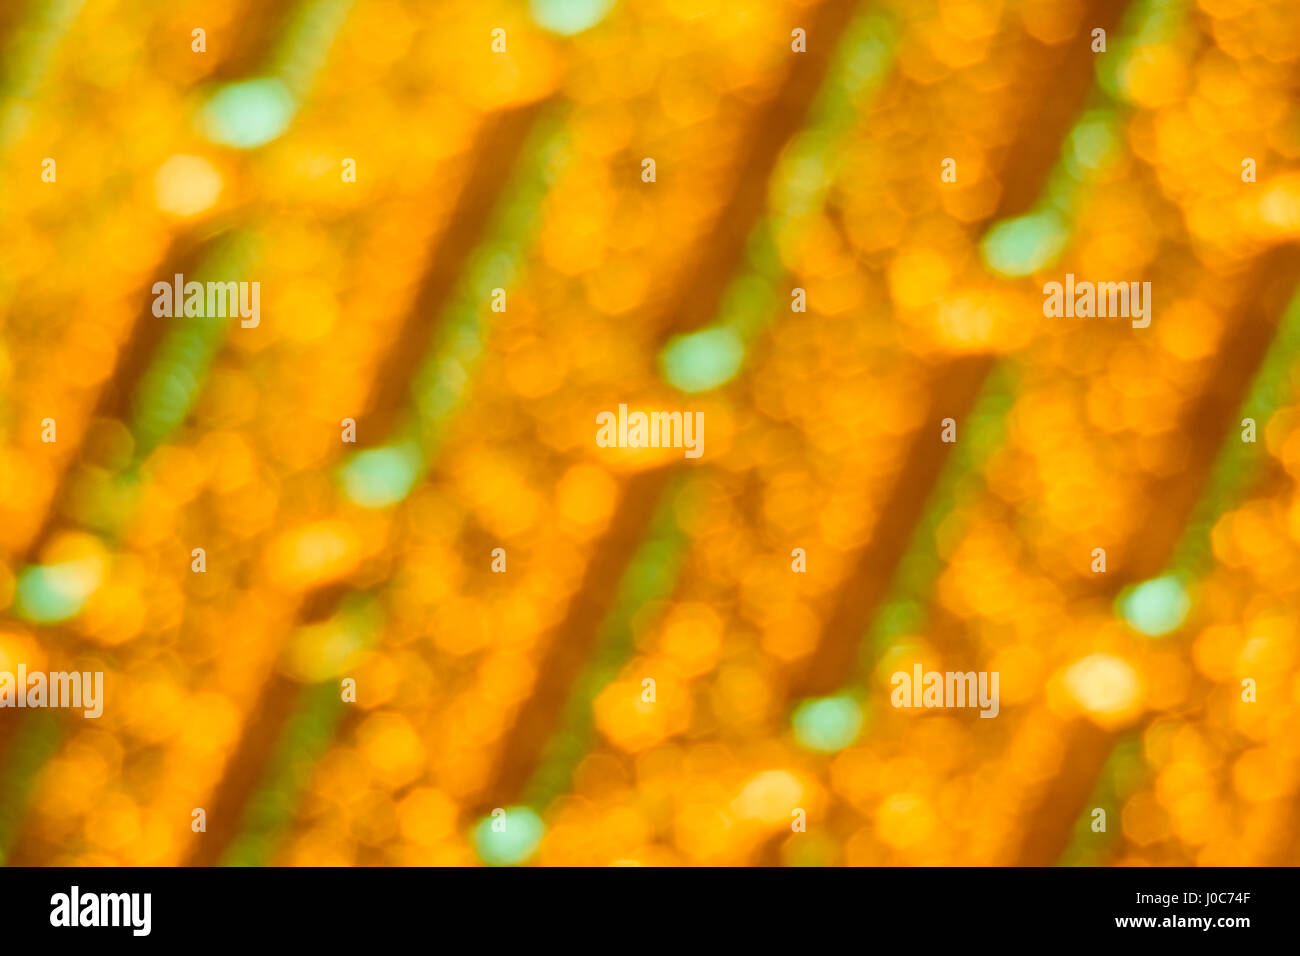 Abstract yellow-gold background with possible use with organic and medical concepts. Stock Photo